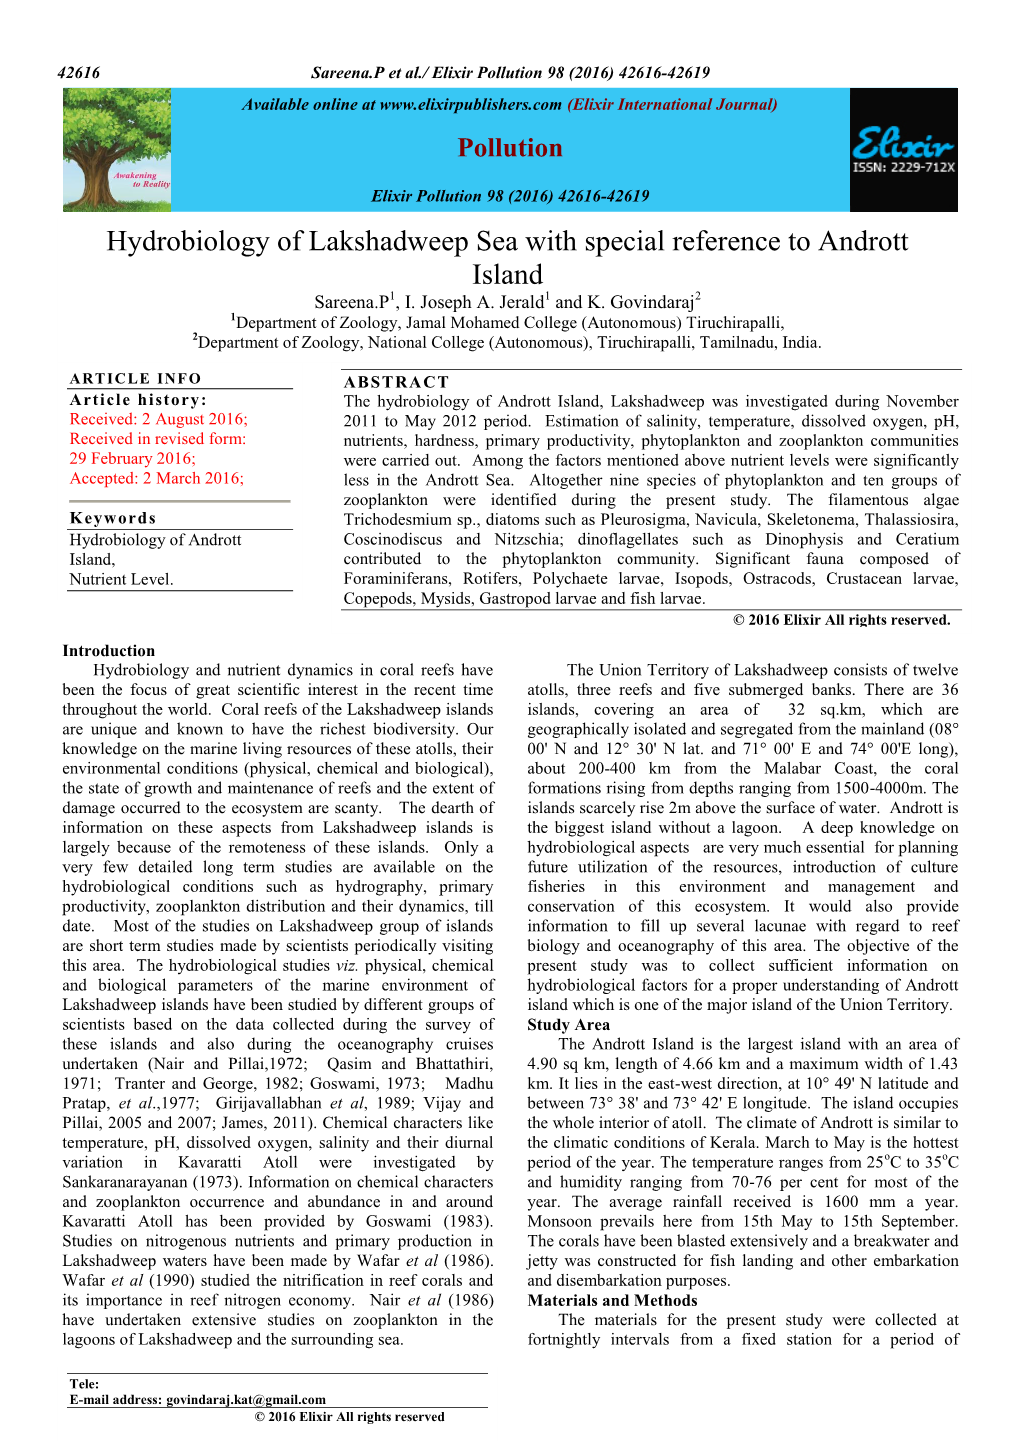 Hydrobiology of Lakshadweep Sea with Special Reference to Andrott Island Sareena.P1, I